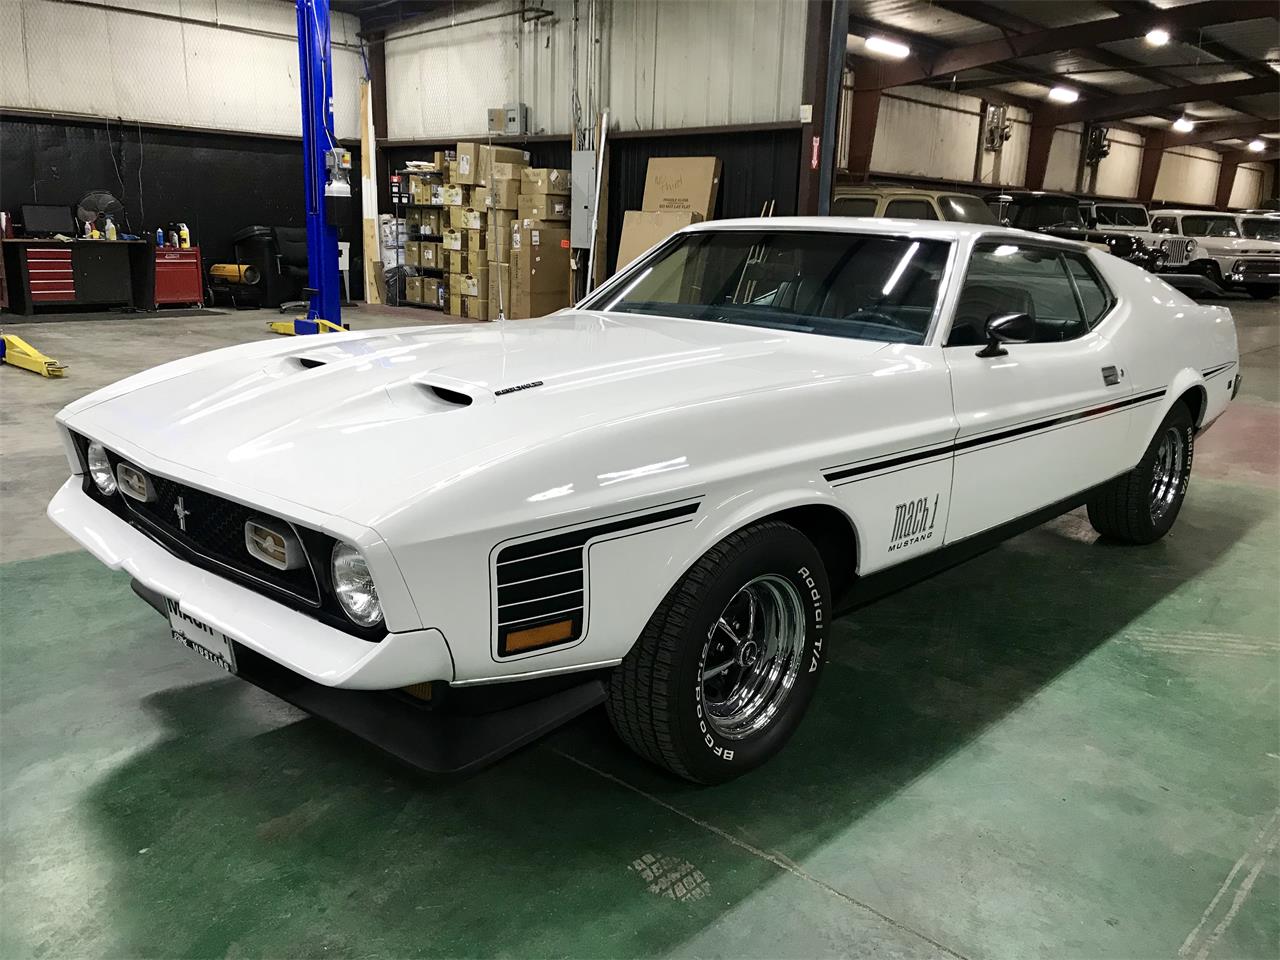 1971 Ford Mustang Mach 1 for Sale | ClassicCars.com | CC-1057889